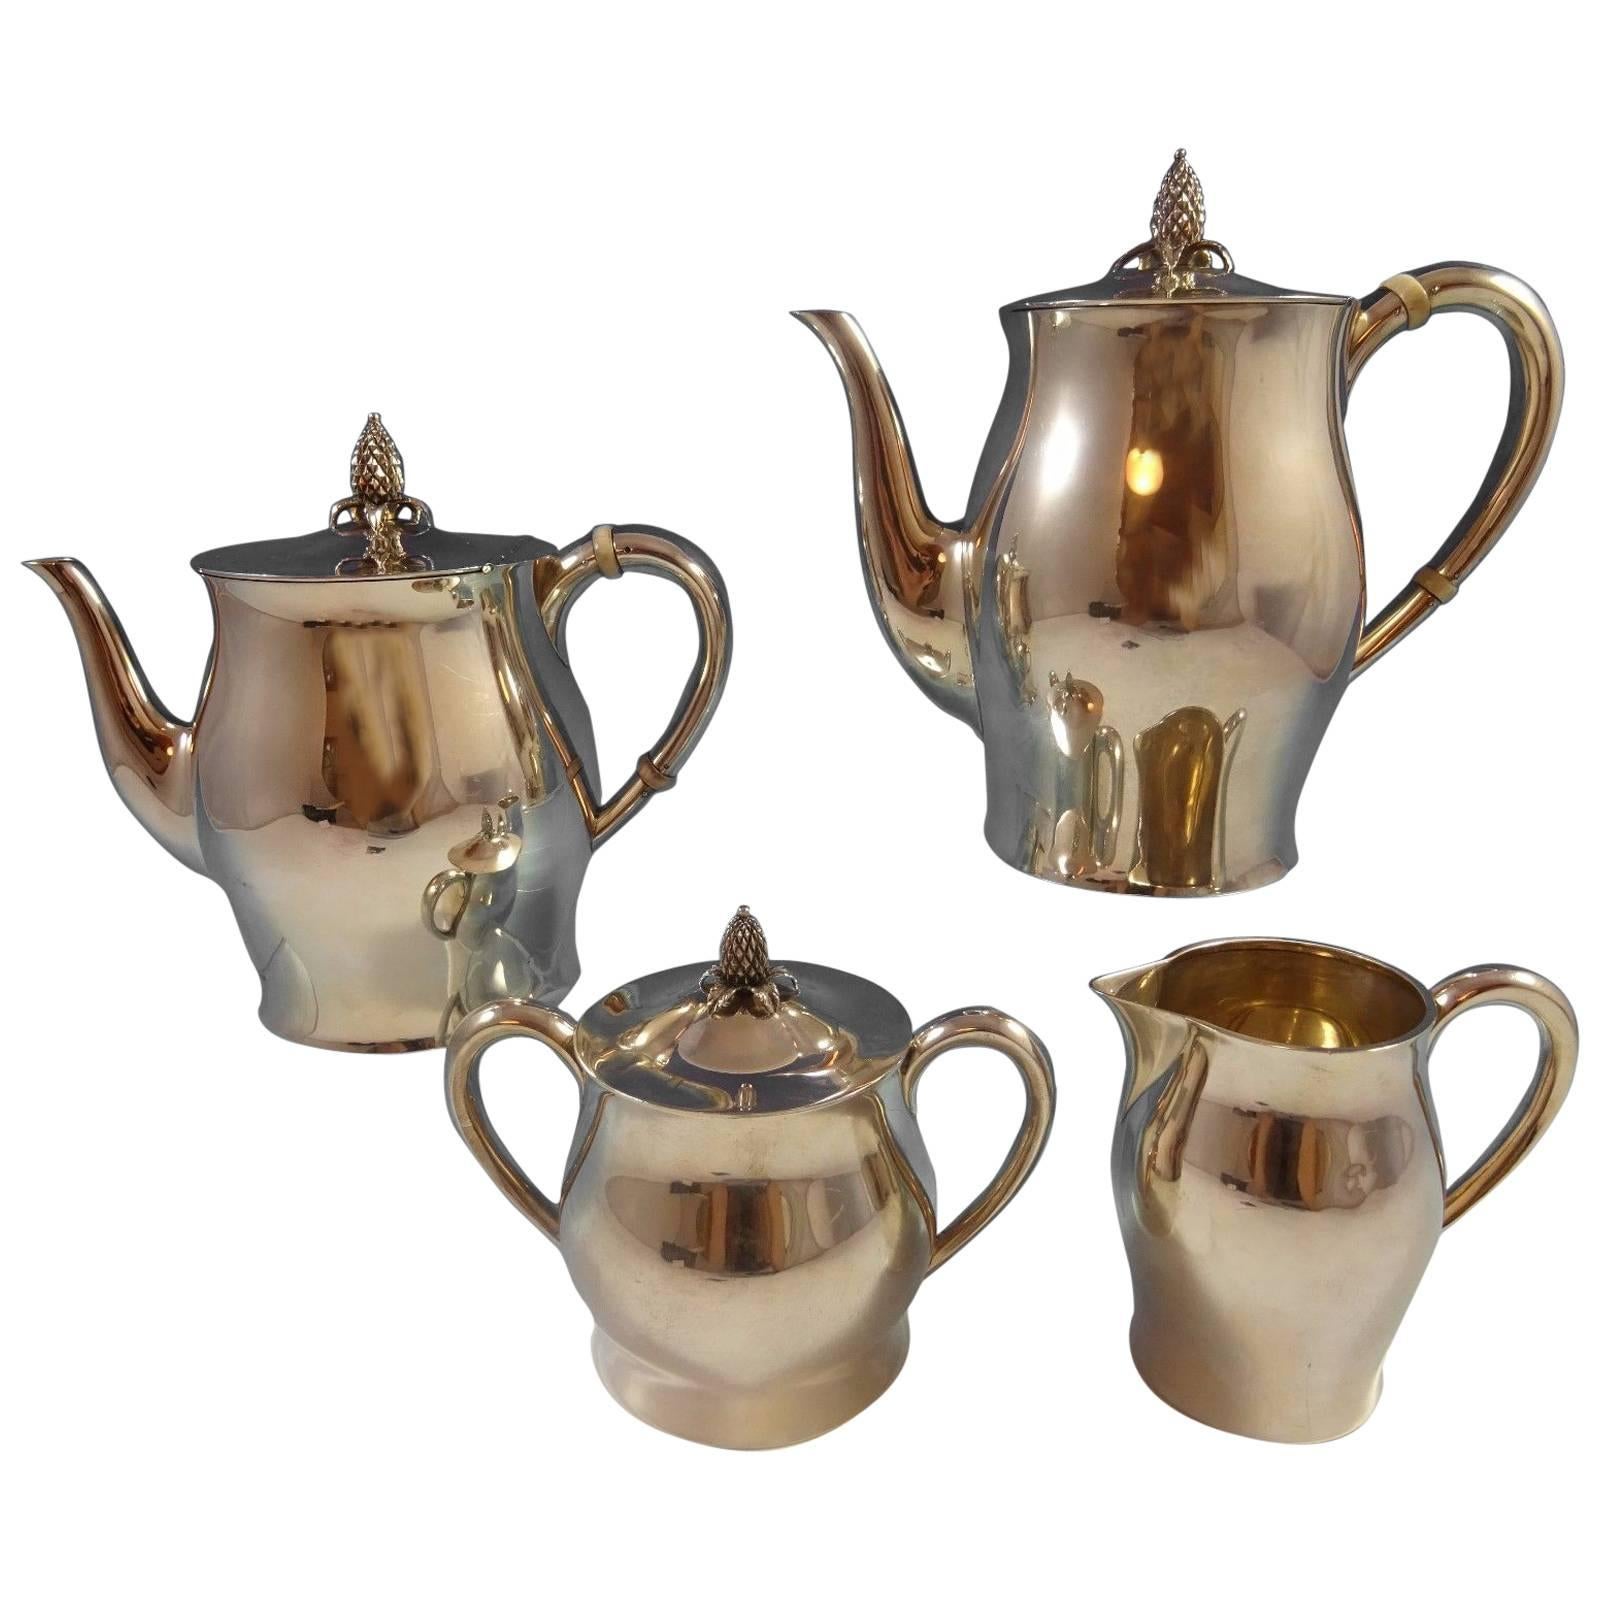 Paul Revere by Tuttle Sterling Silver Tea Set of Four Pieces Hollowware